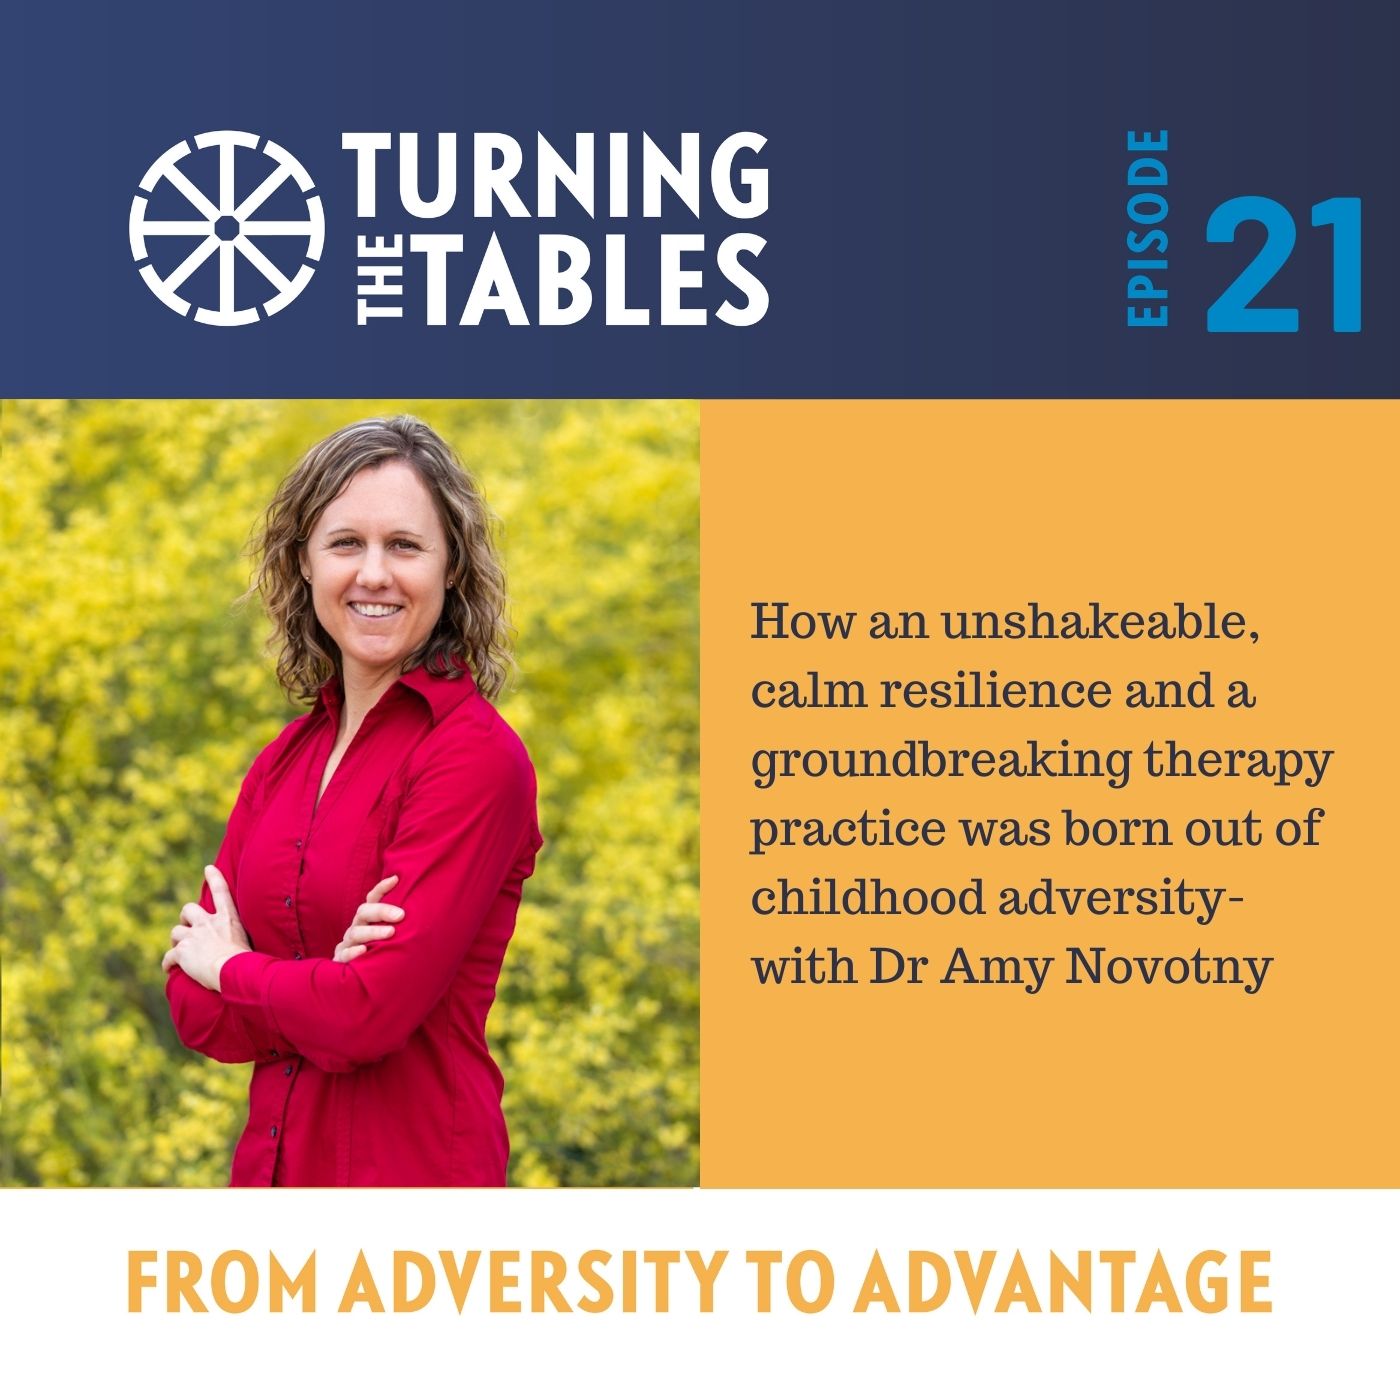 EP 21: How an unshakeable, calm resilience and a groundbreaking therapy practice was born through childhood adversity with Dr Amy Novotny